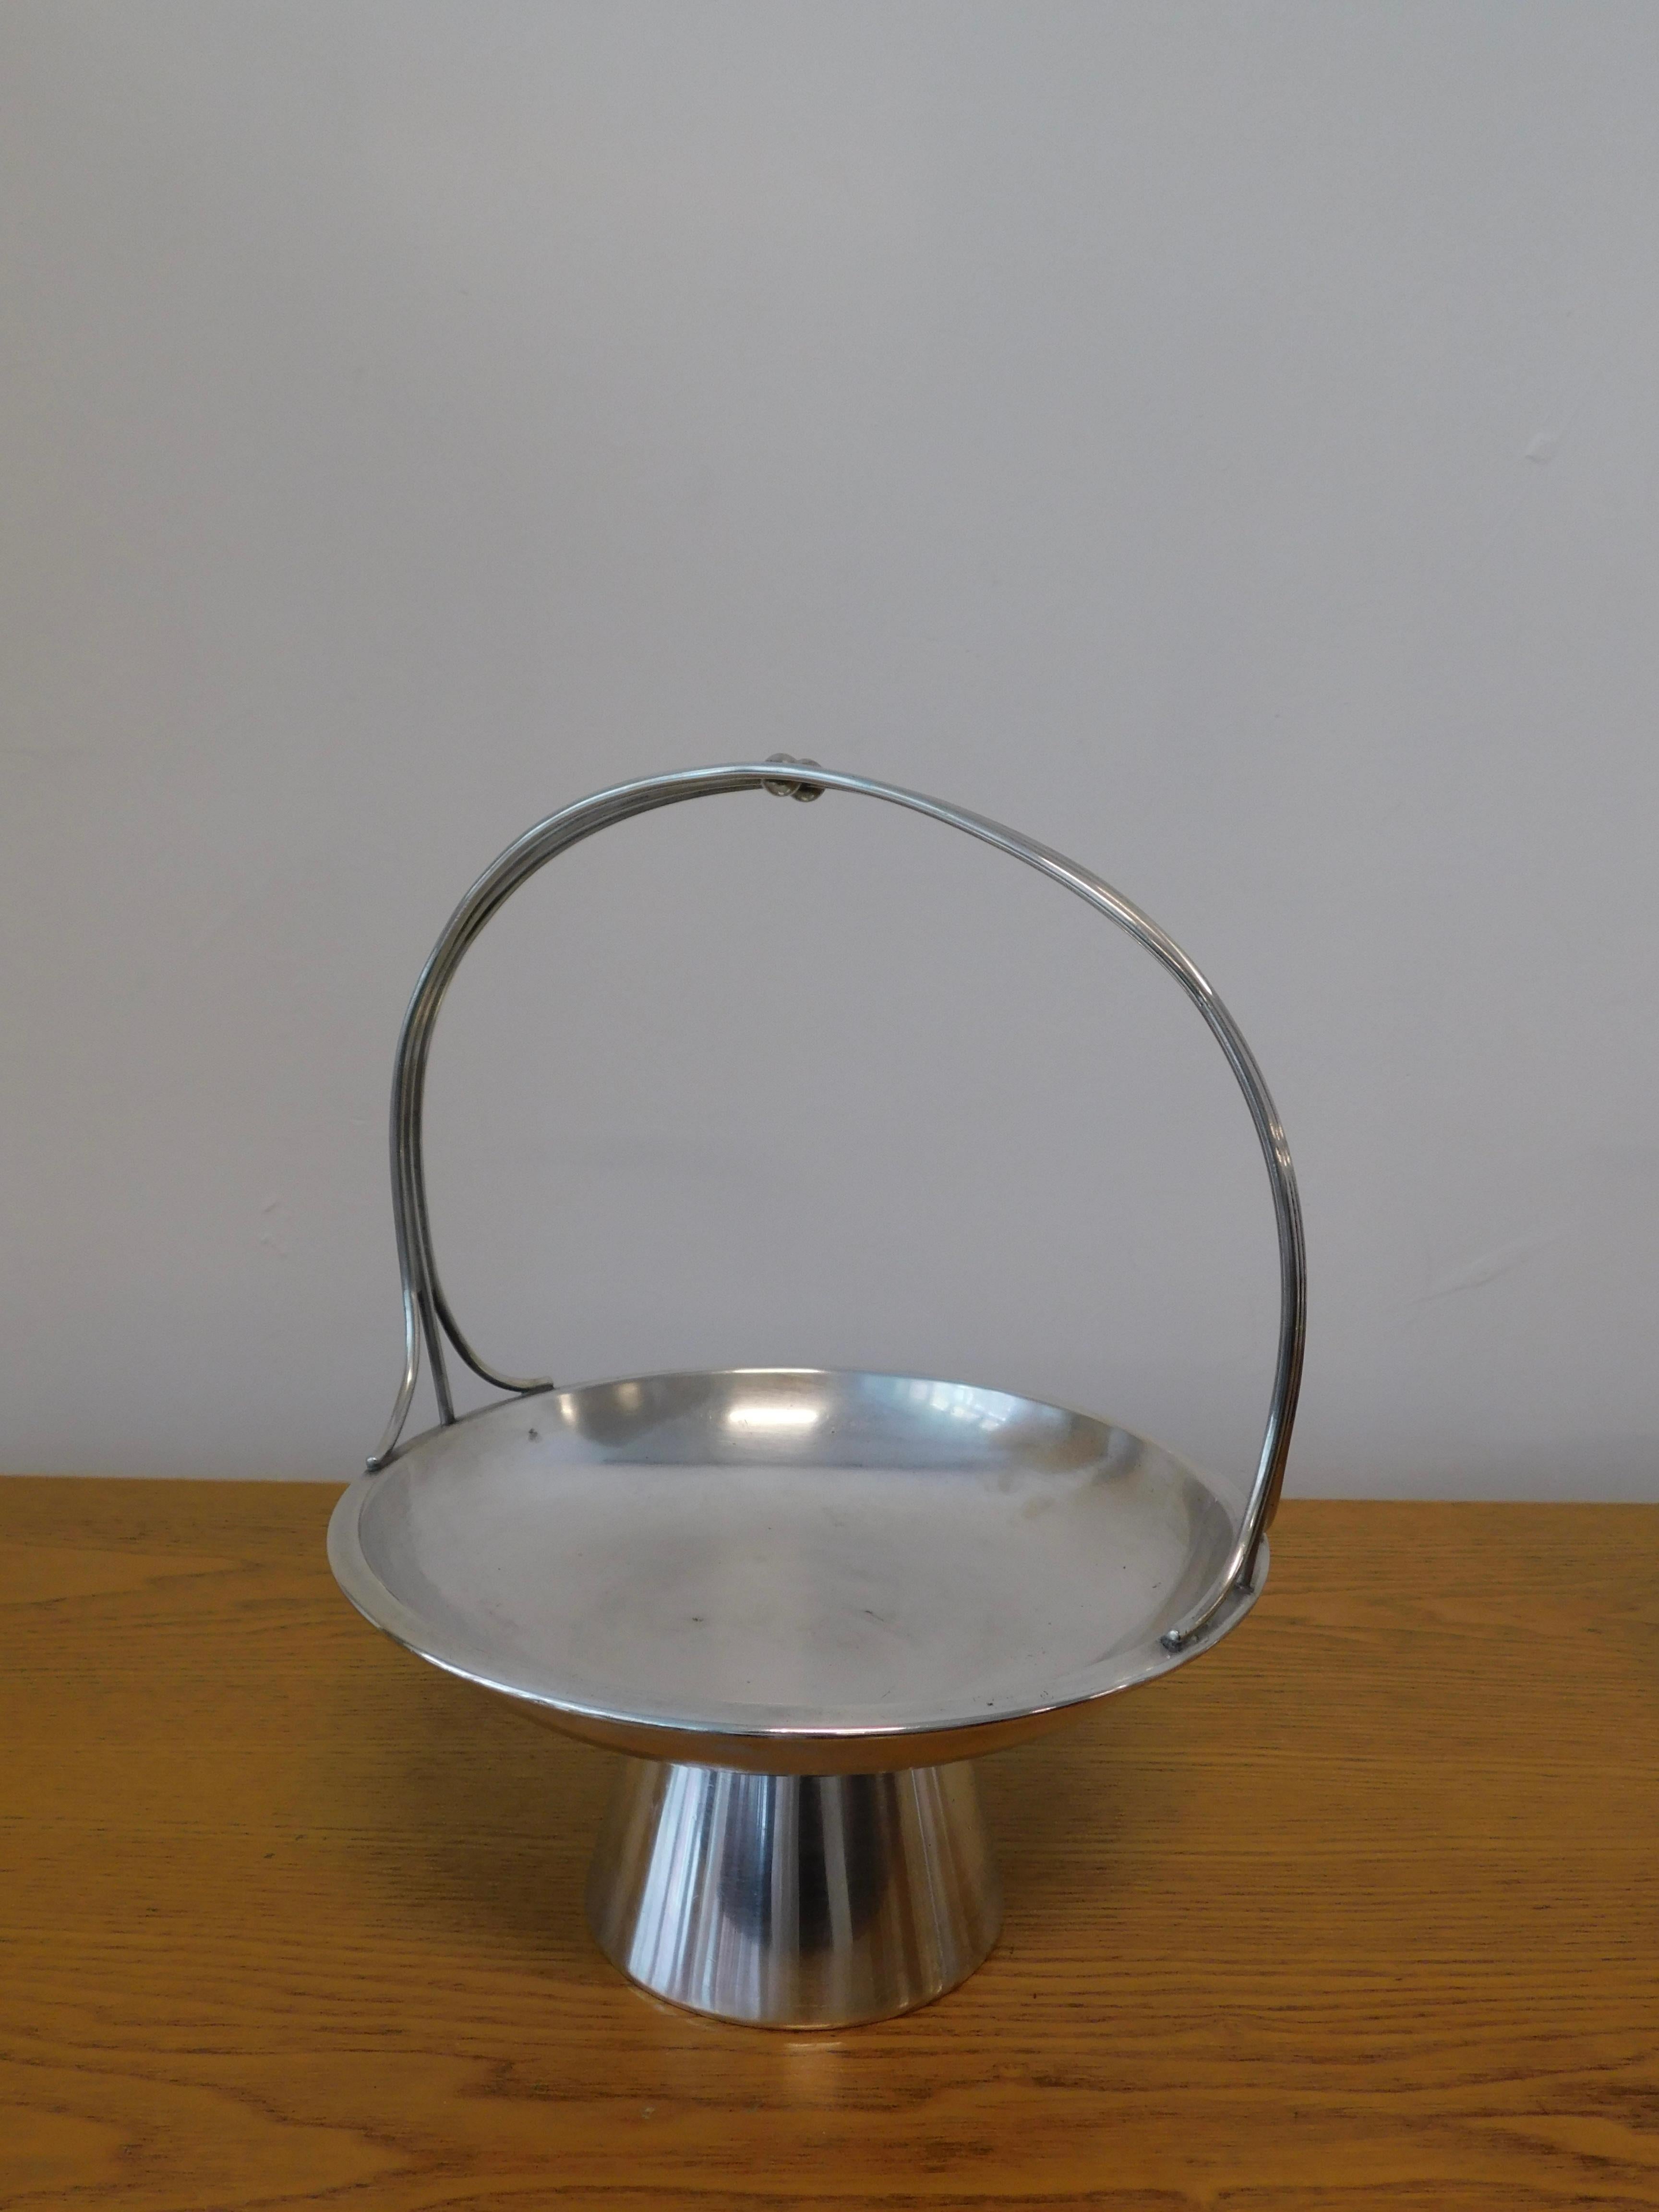 Silver Set of 4 alpacca fruit baskets by Gio Ponti for Arthur Krupp, Italy, 1930s For Sale